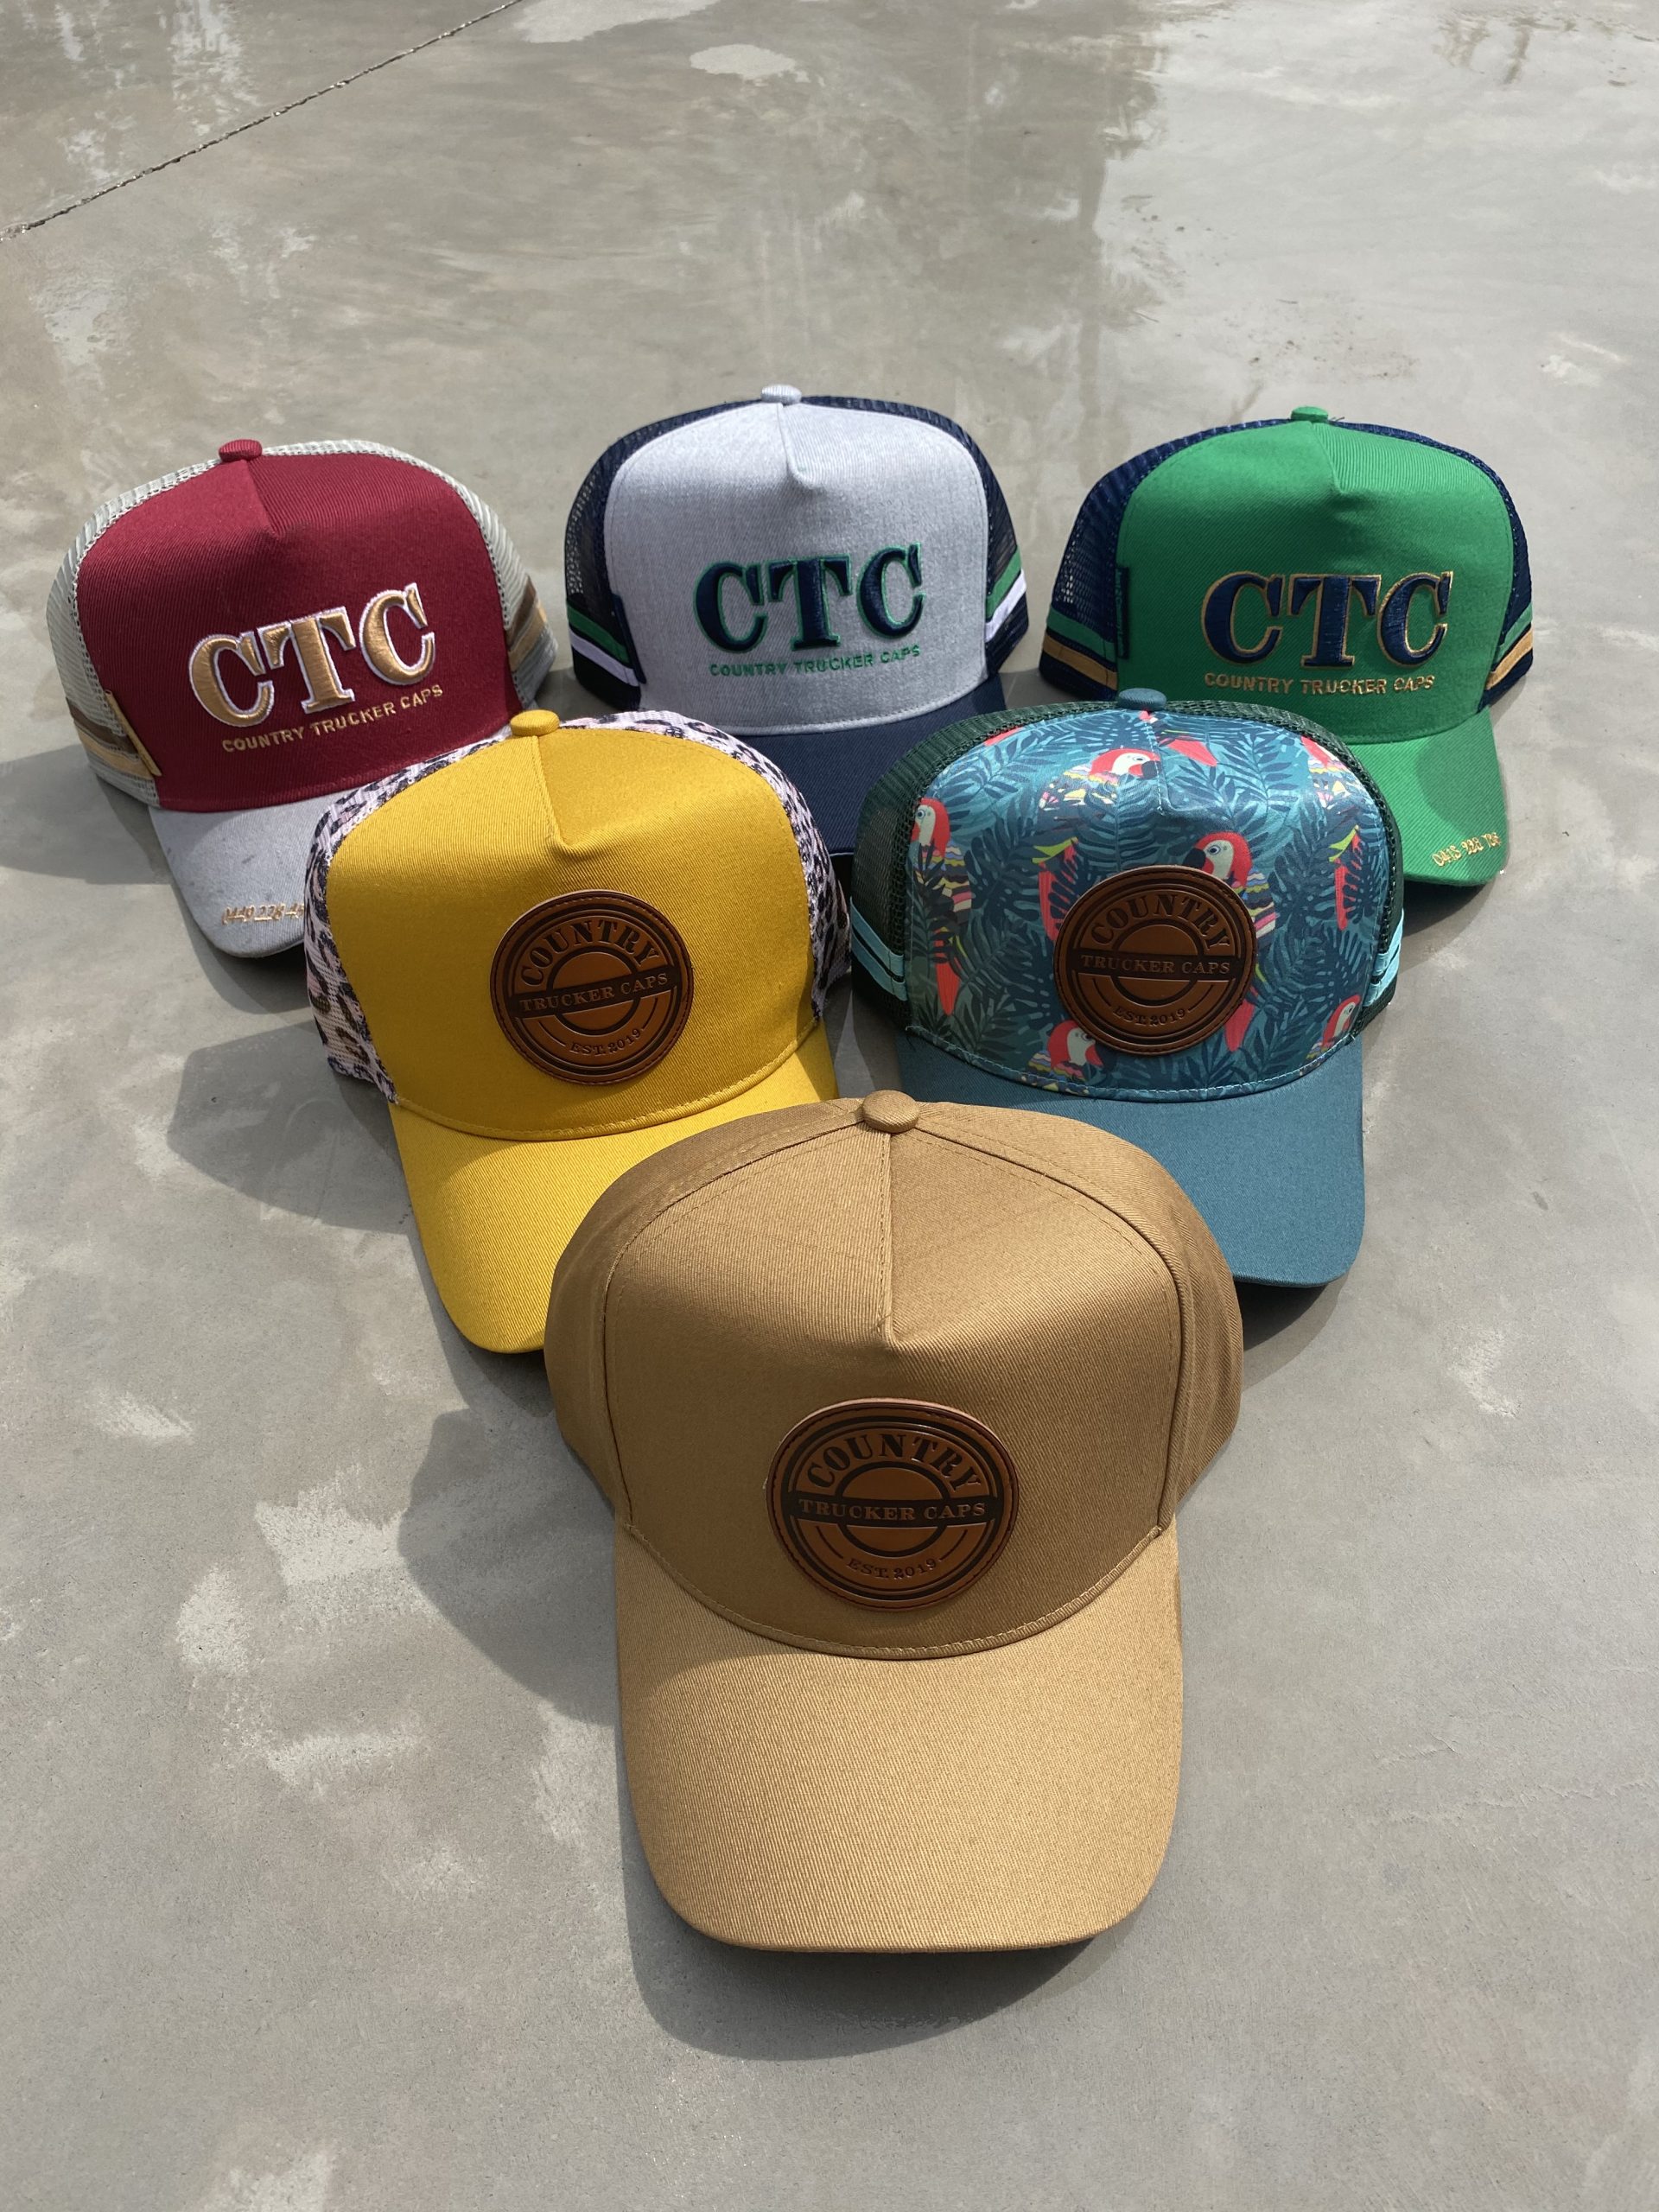 Country Trucker Caps - The Big Hat People - Servicing Australia Wide